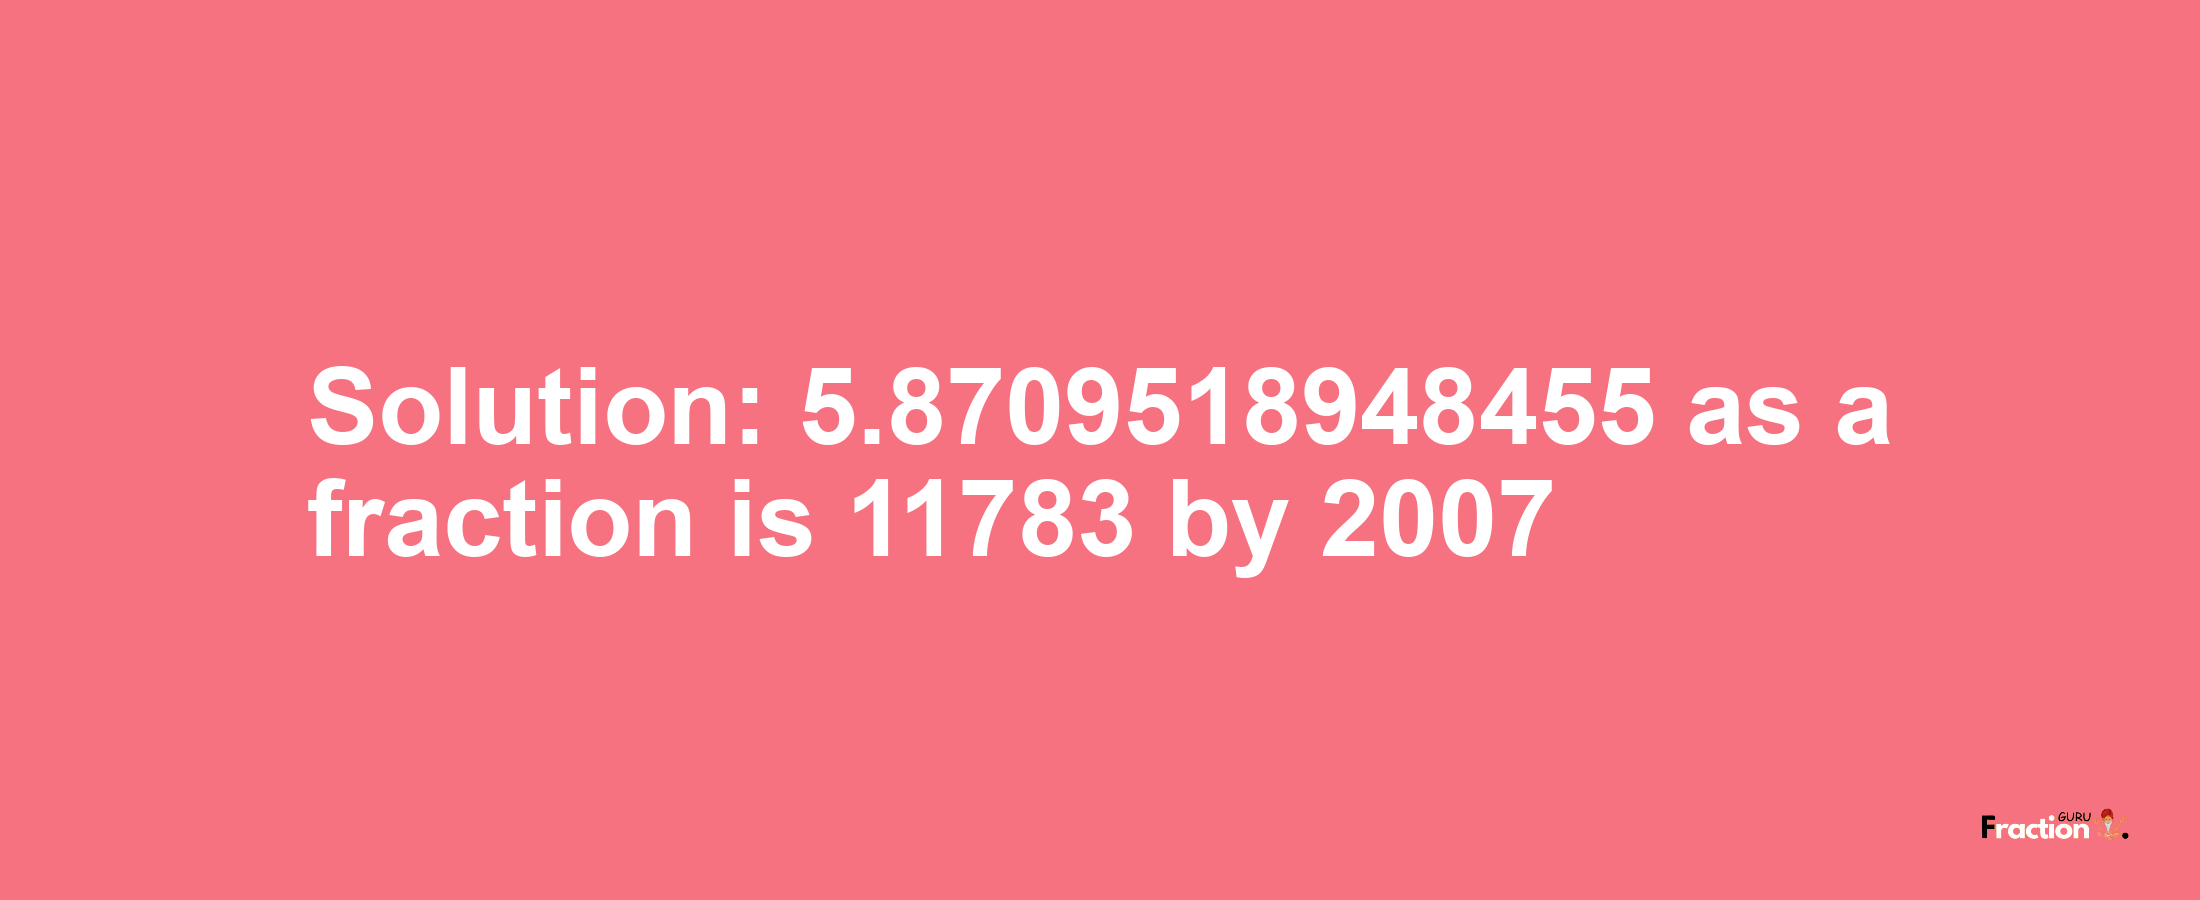 Solution:5.8709518948455 as a fraction is 11783/2007